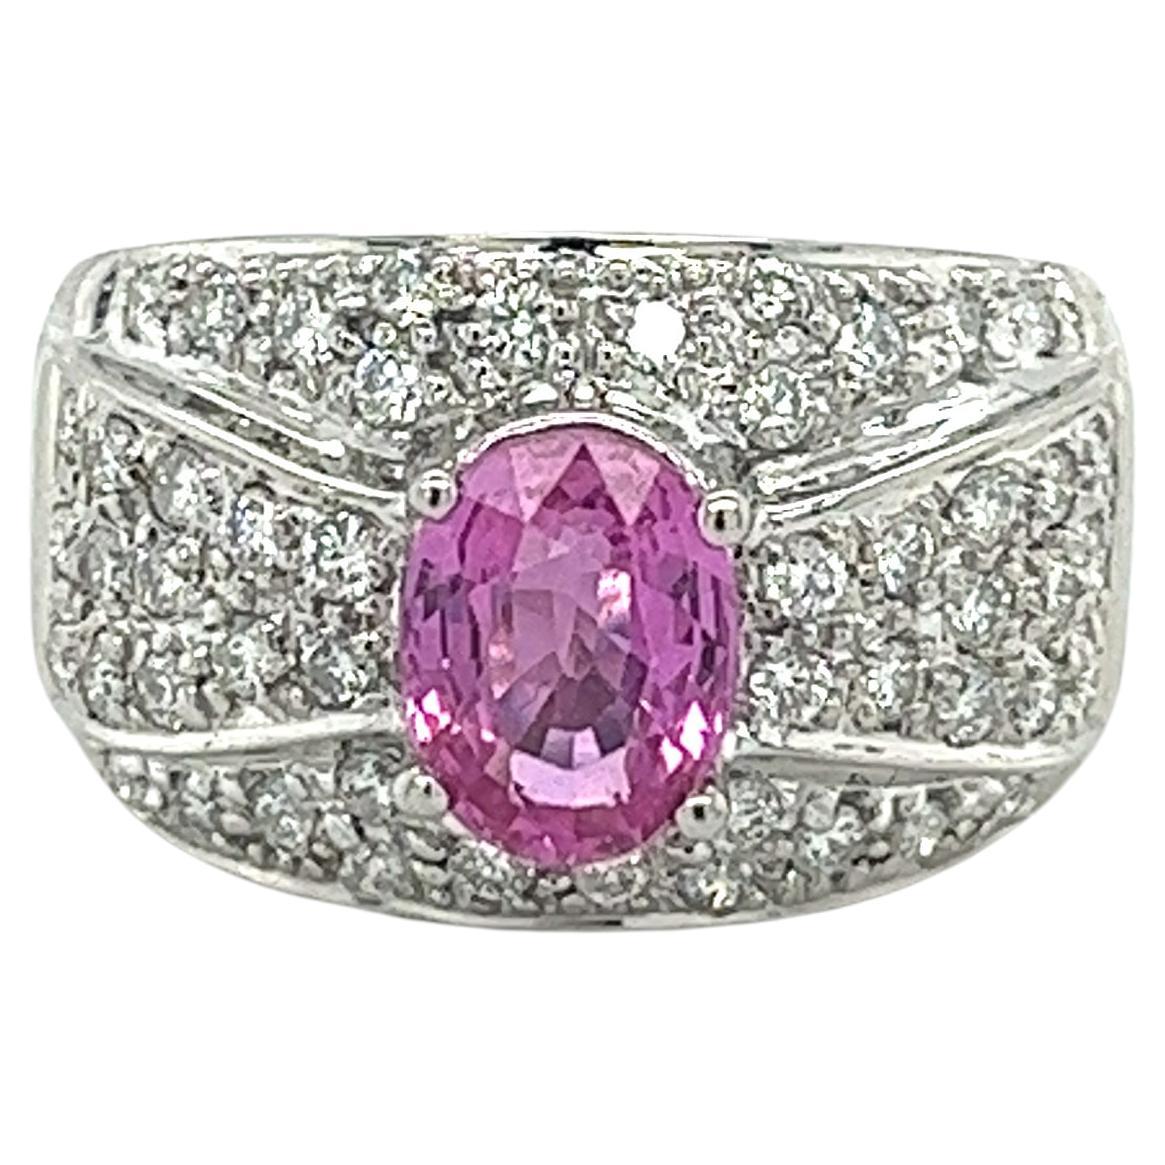 Intricately paired together, this pink sapphire and diamond ring boasts an exceptionally colored oval cut 2 carat Pink Sapphire center stone. Surrounded by a cluster of round cut white diamonds, the ring itself is made from 18k white gold. Dome